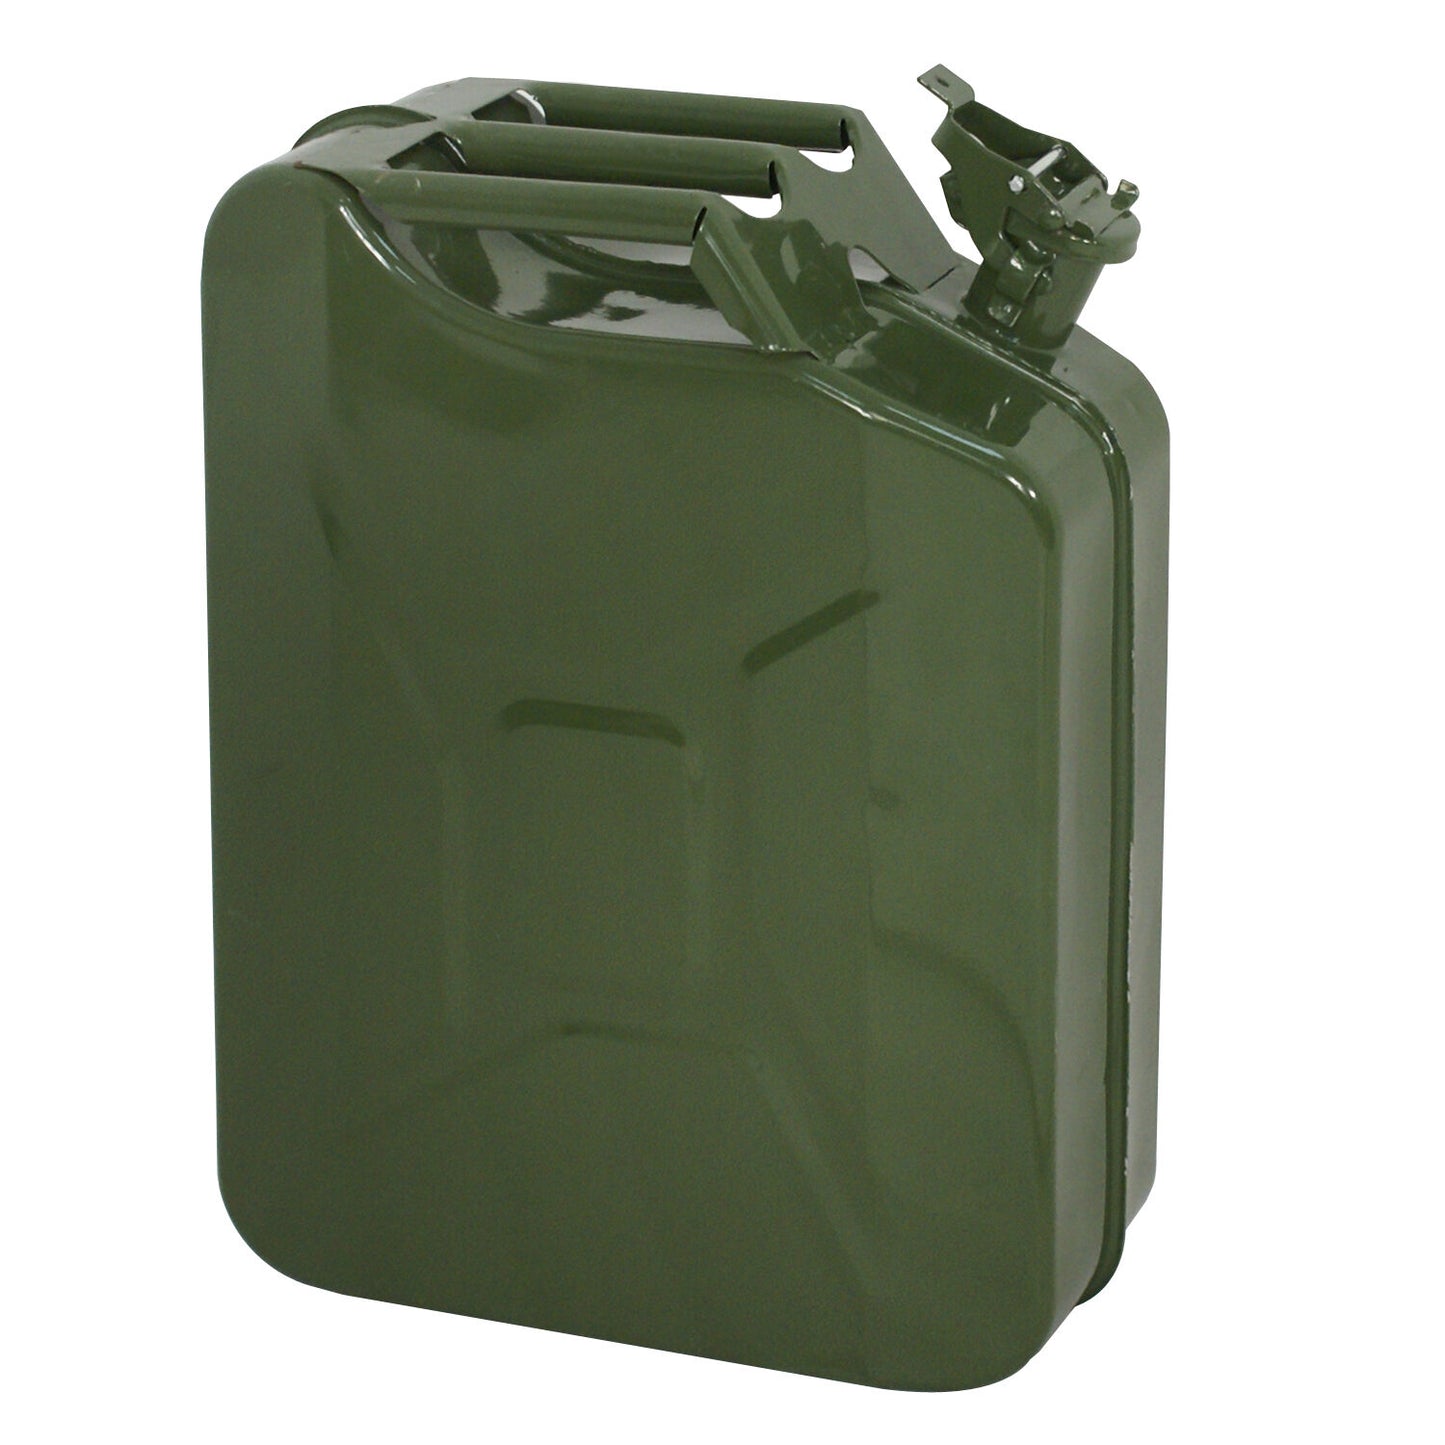 Jerry Can 5 Gallon 20L Army Army Backup Military Metal Steel Tank Prepper